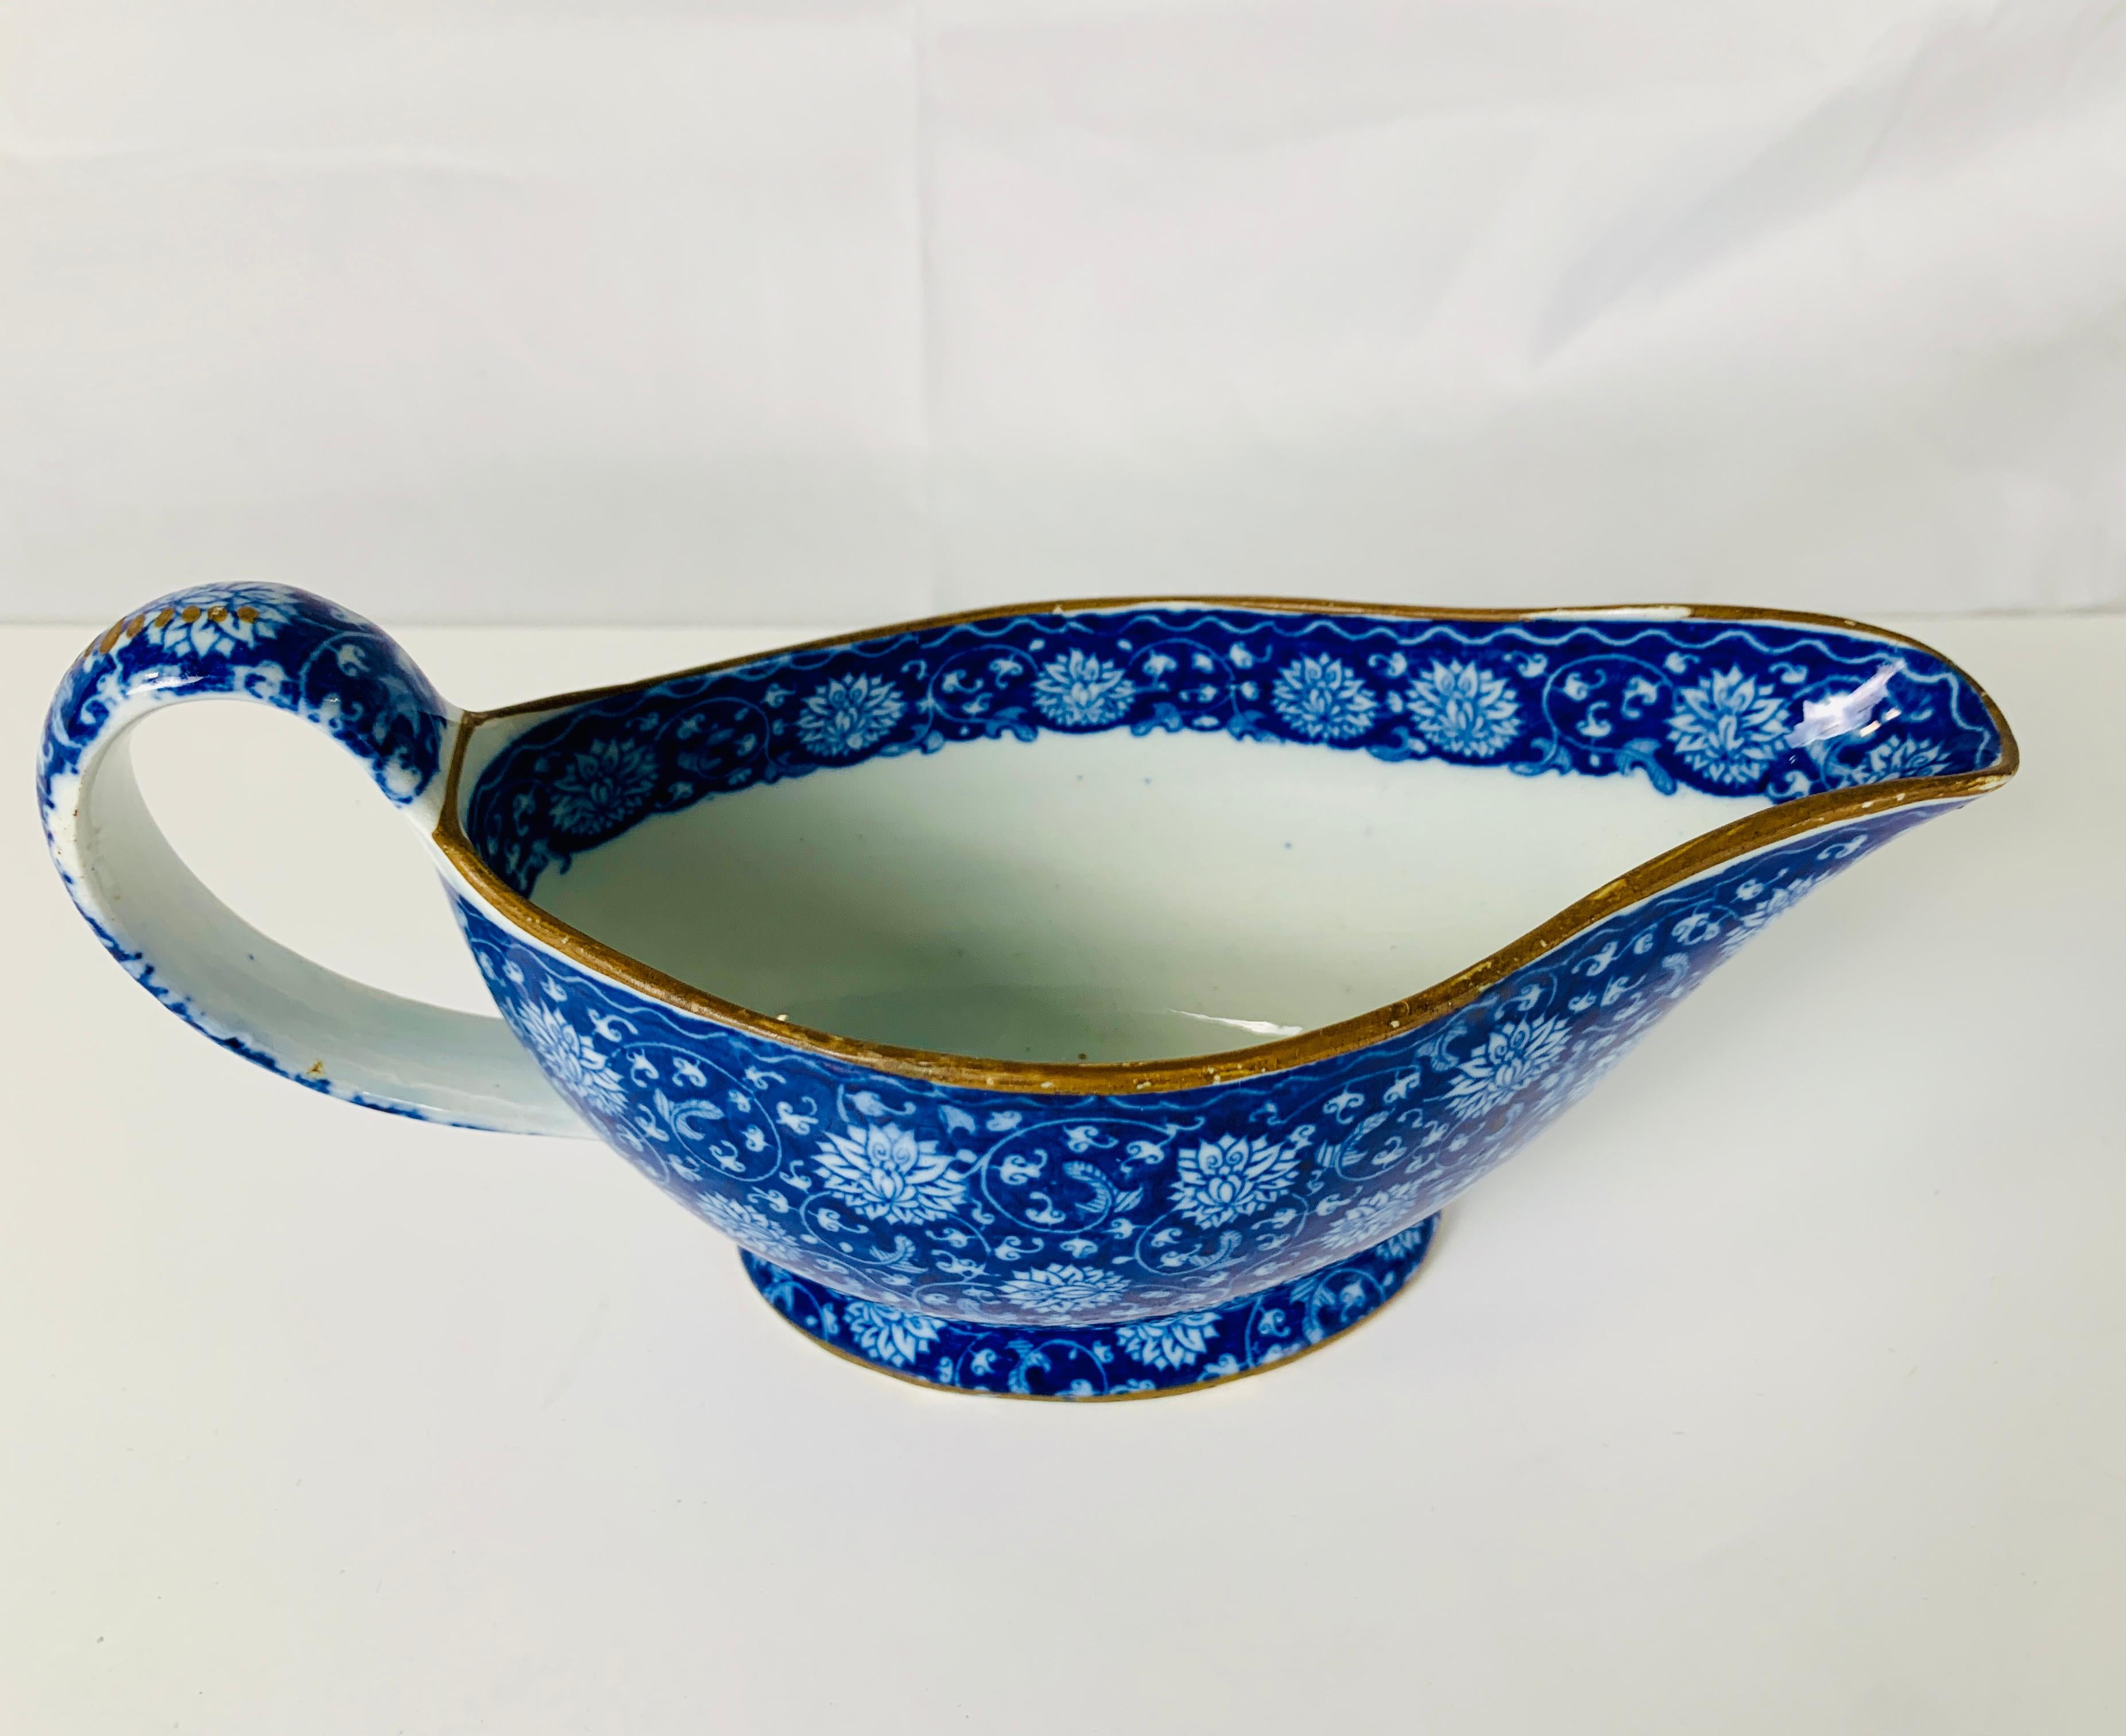 Provenance: The Private Collection of Mario Buatta, a Blue and white pearled creamware sauceboat made in England circa 1820
Great Color! Great Pattern!
Mario loved blue and white, and he filled his home with blue and white pottery and porcelain.